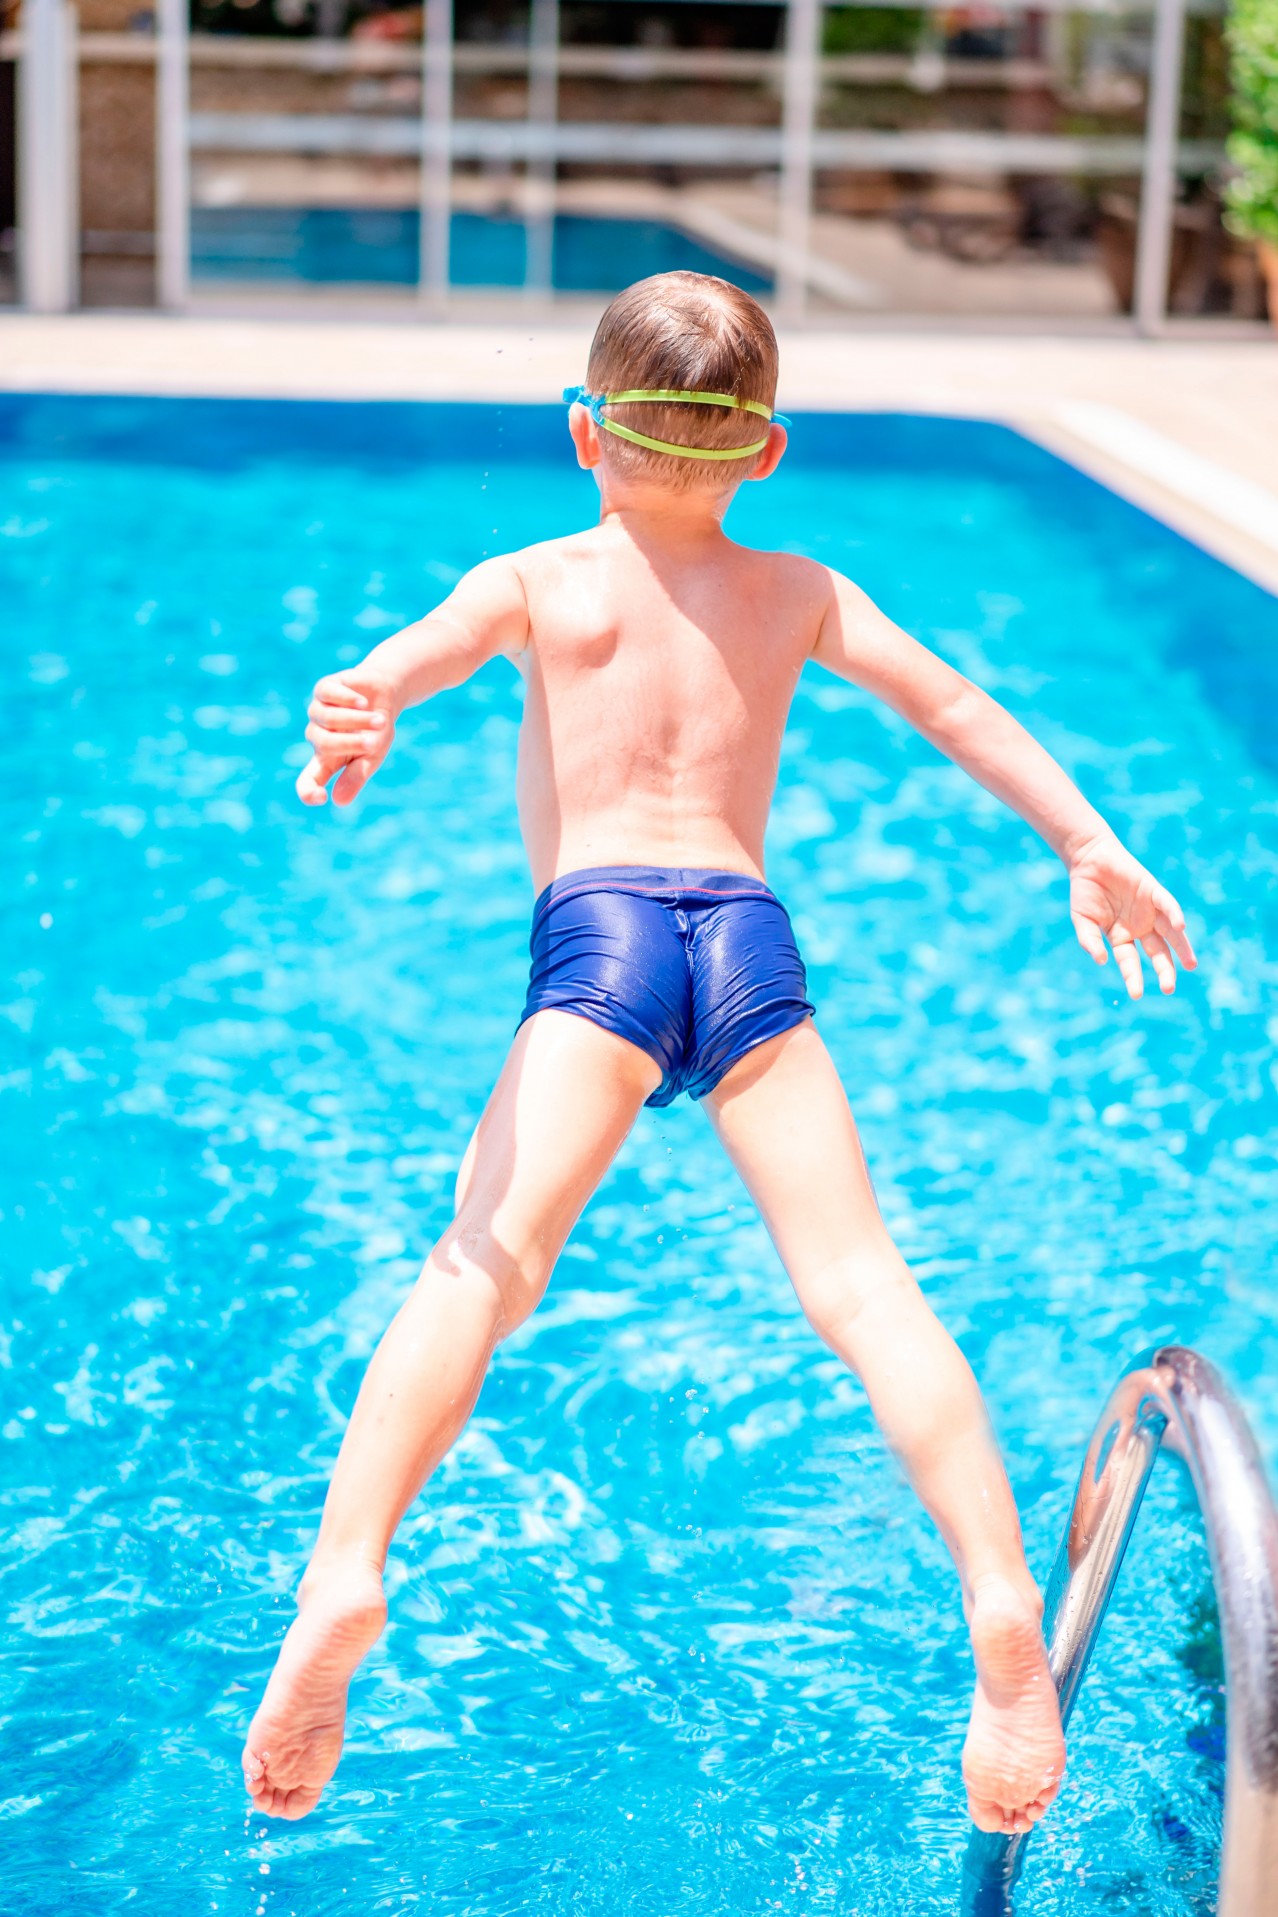 Boy jumping in the swimming pool